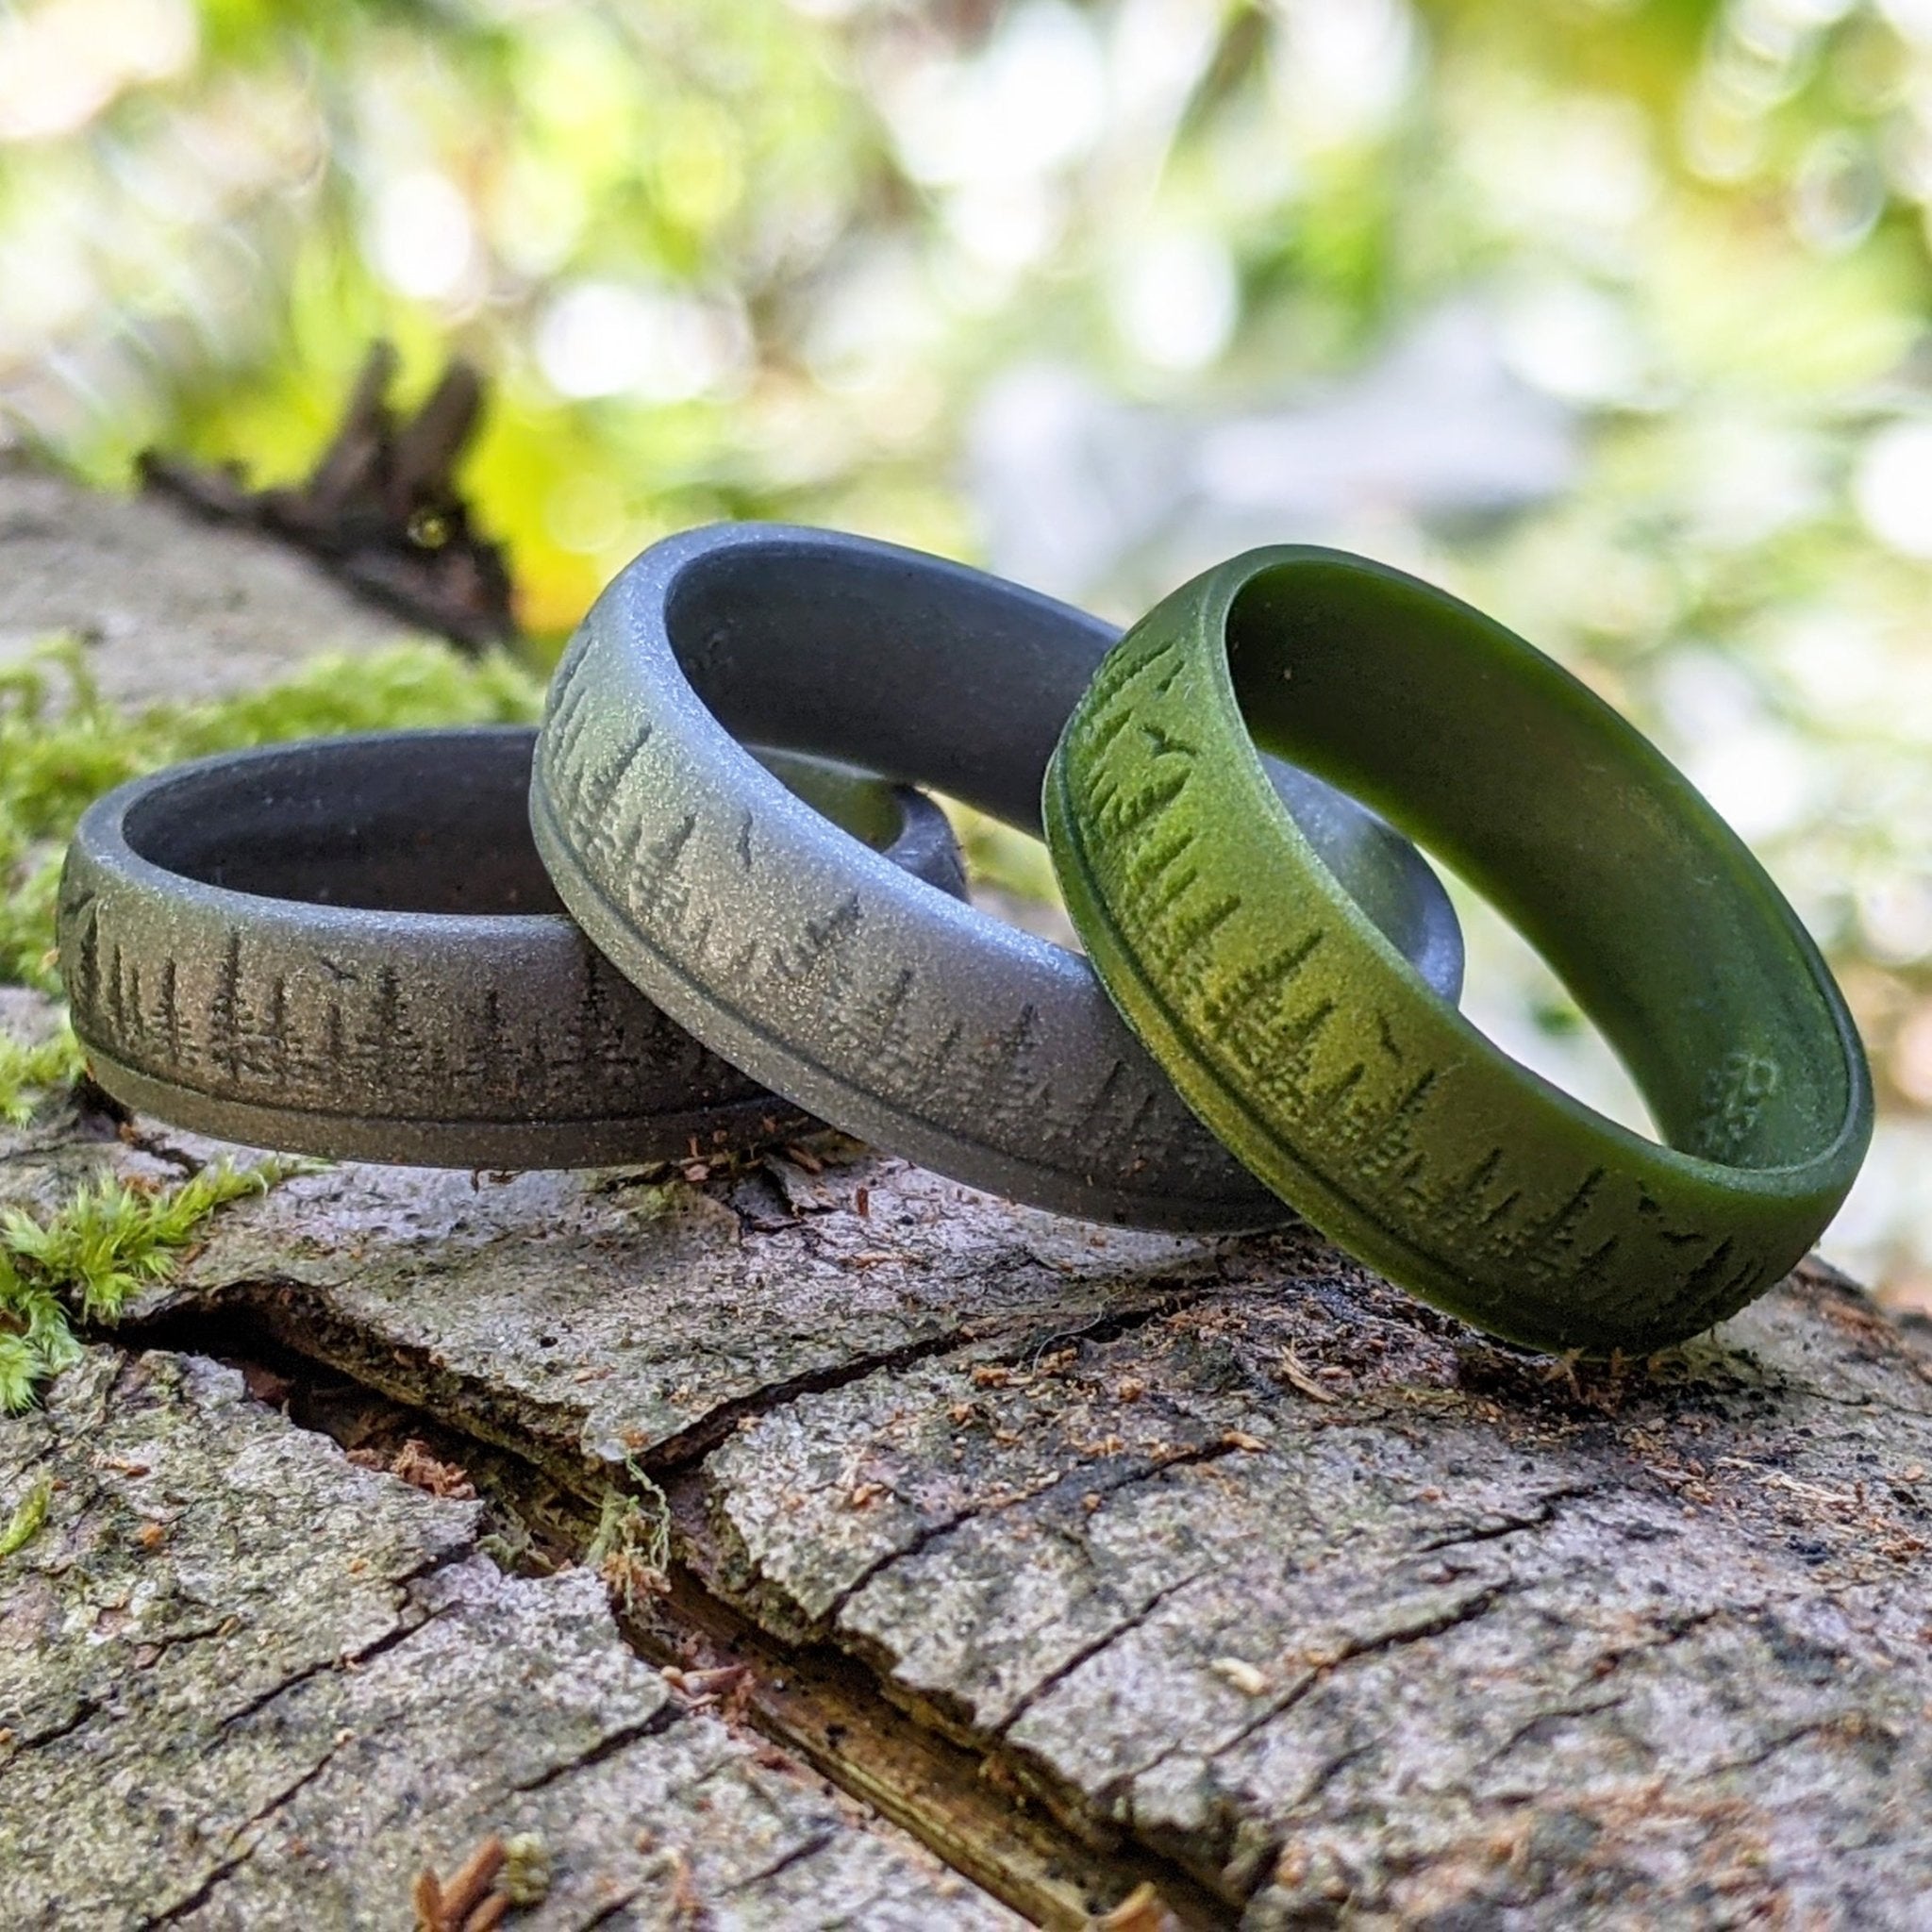 Custom Engraved Forest Trees Silicone Ring - Arc 4mm or 6mm Band - Knot Theory